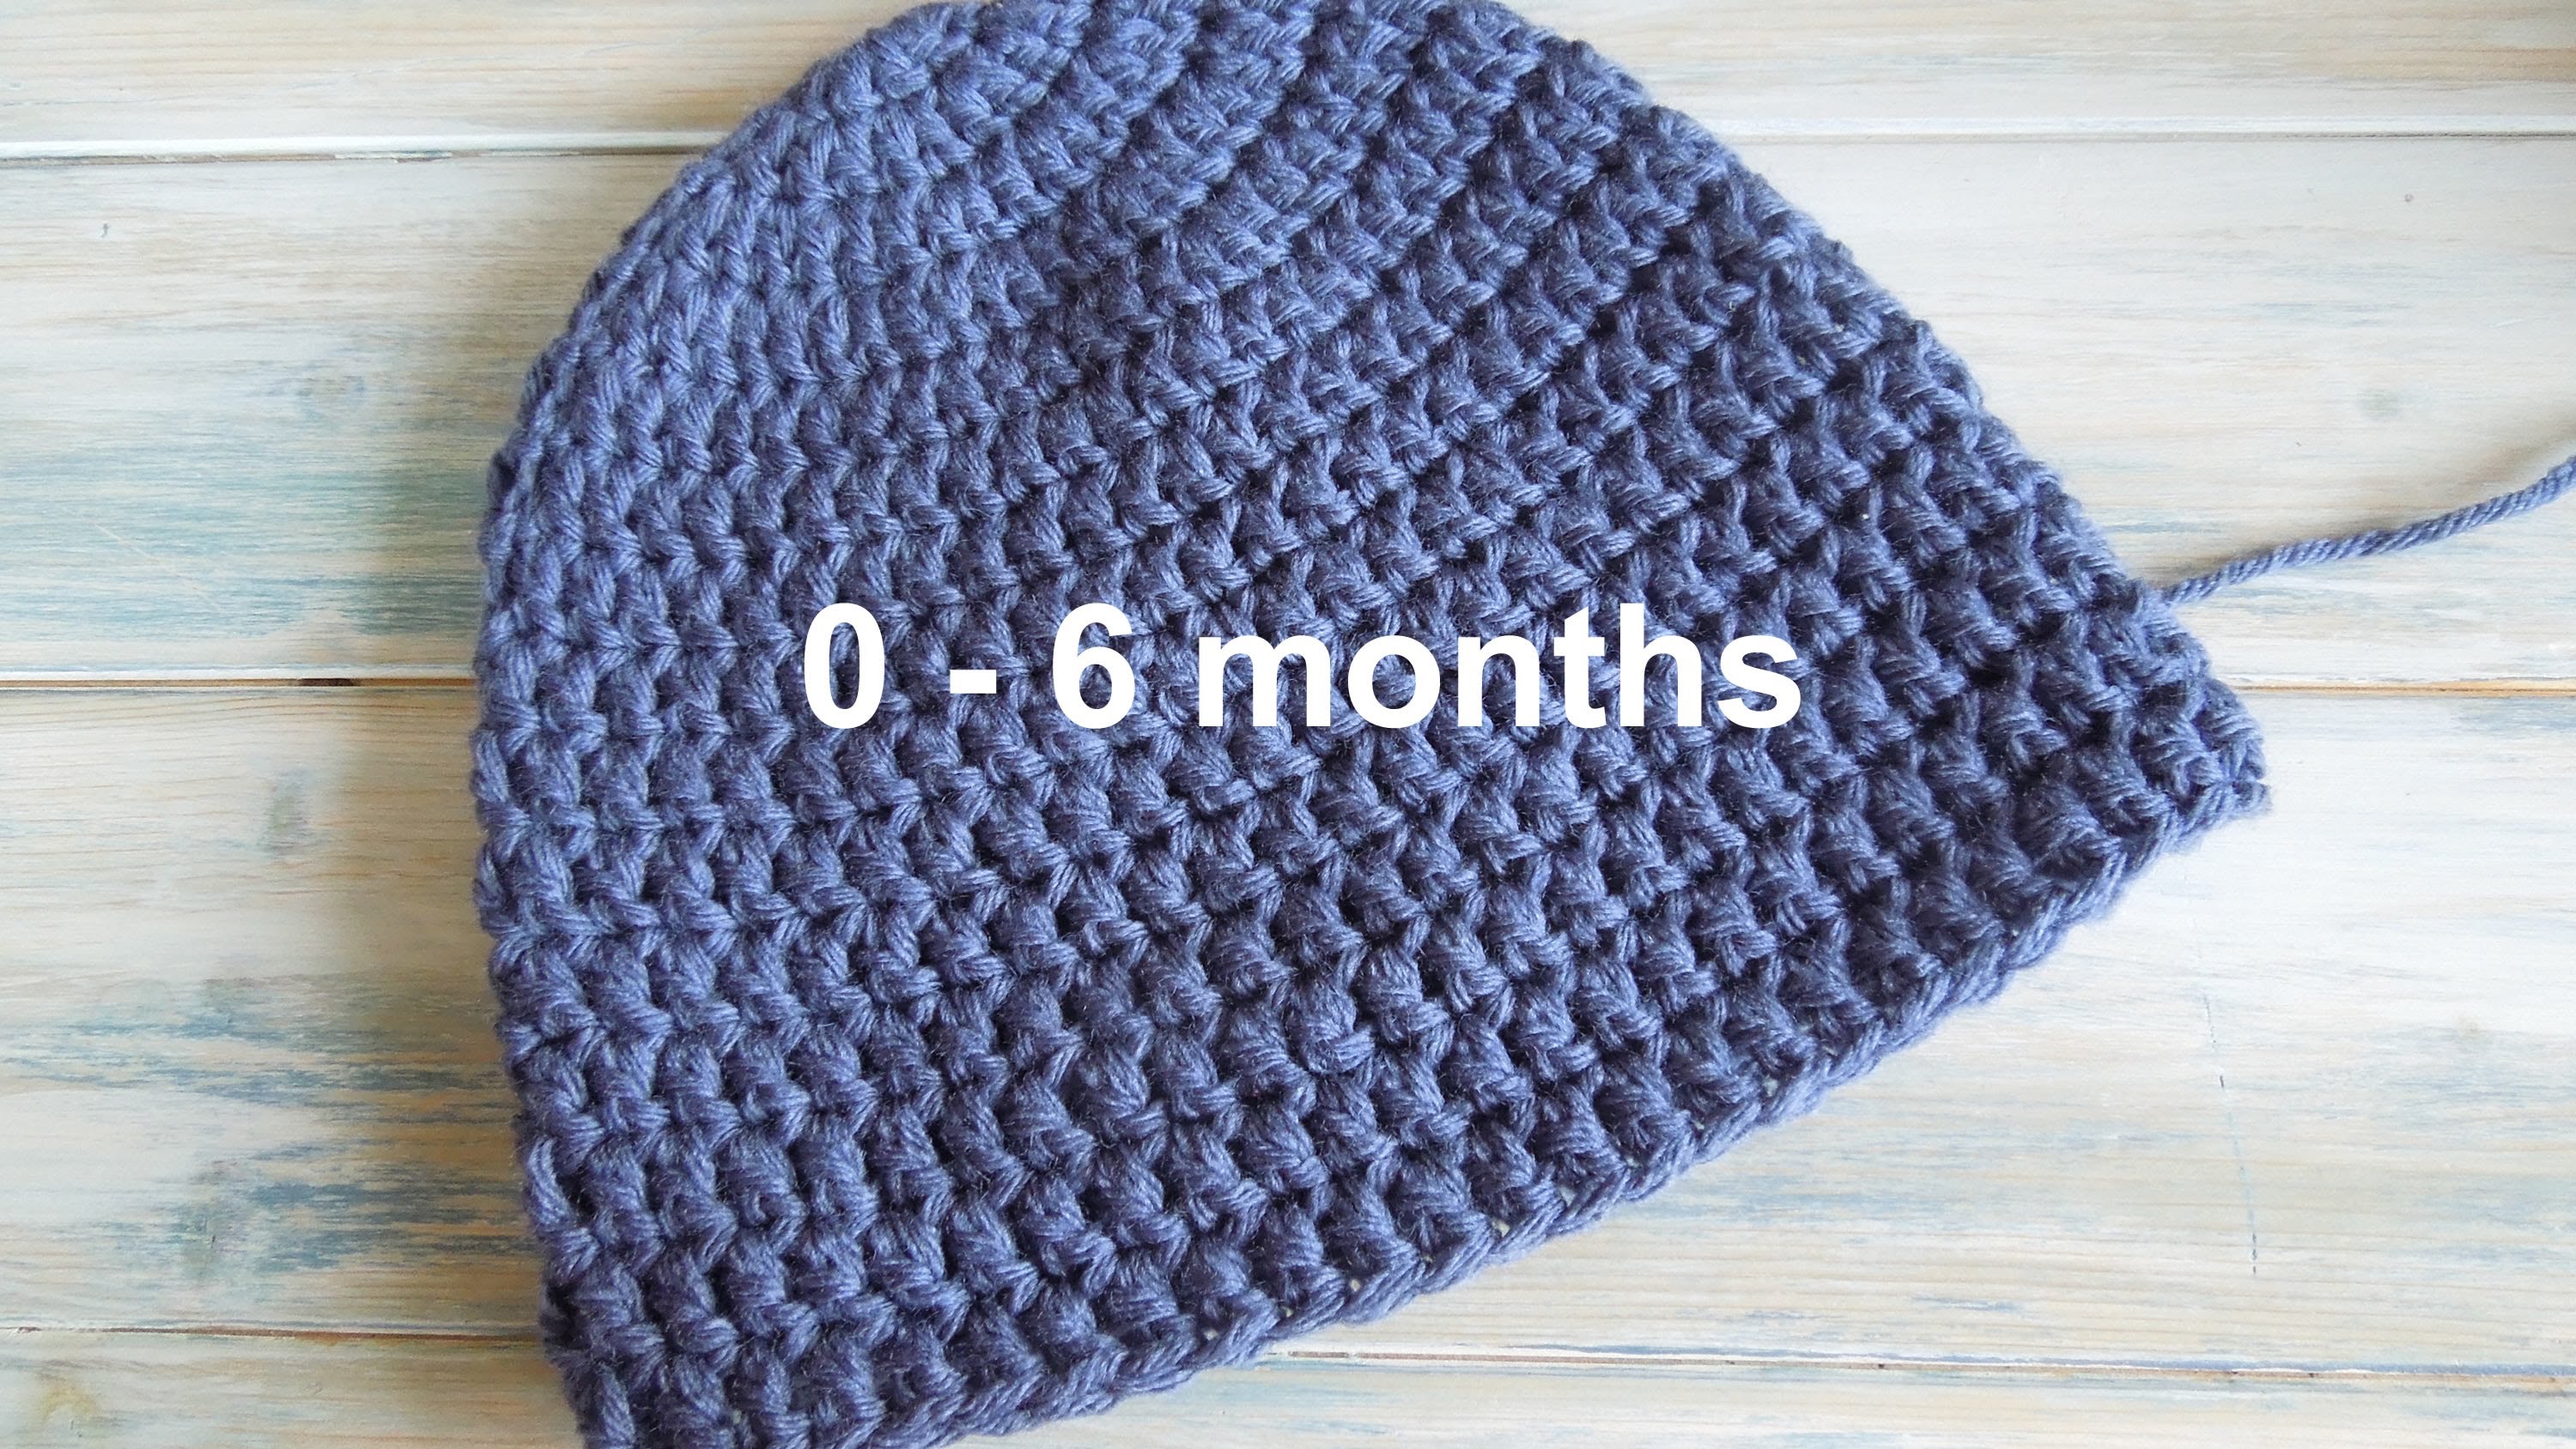 crochet baby beanie pattern (crochet) how to - crochet a simple baby beanie for 0-6 months - youtube PIXEFXV